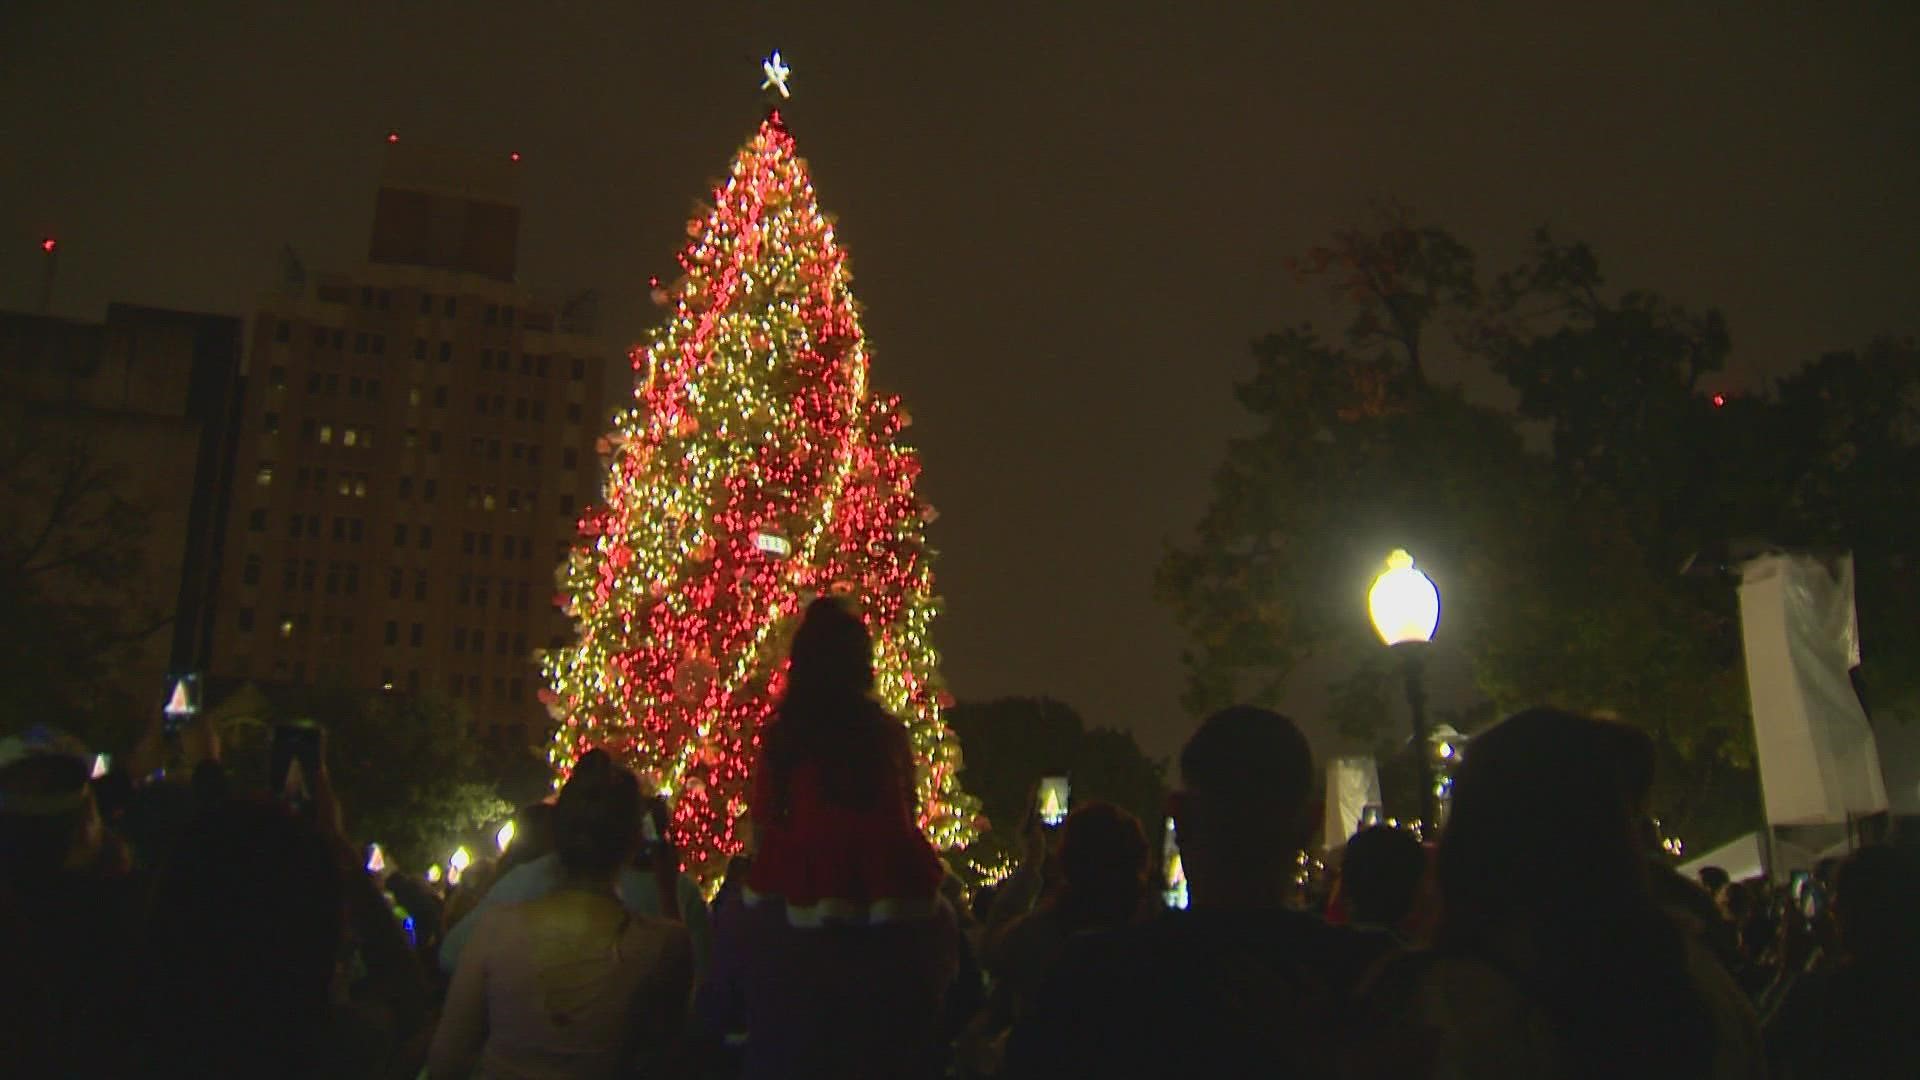 The nearly 50-foot Nordmann Fir Tree will be decorated with more than 10,000 white lights.